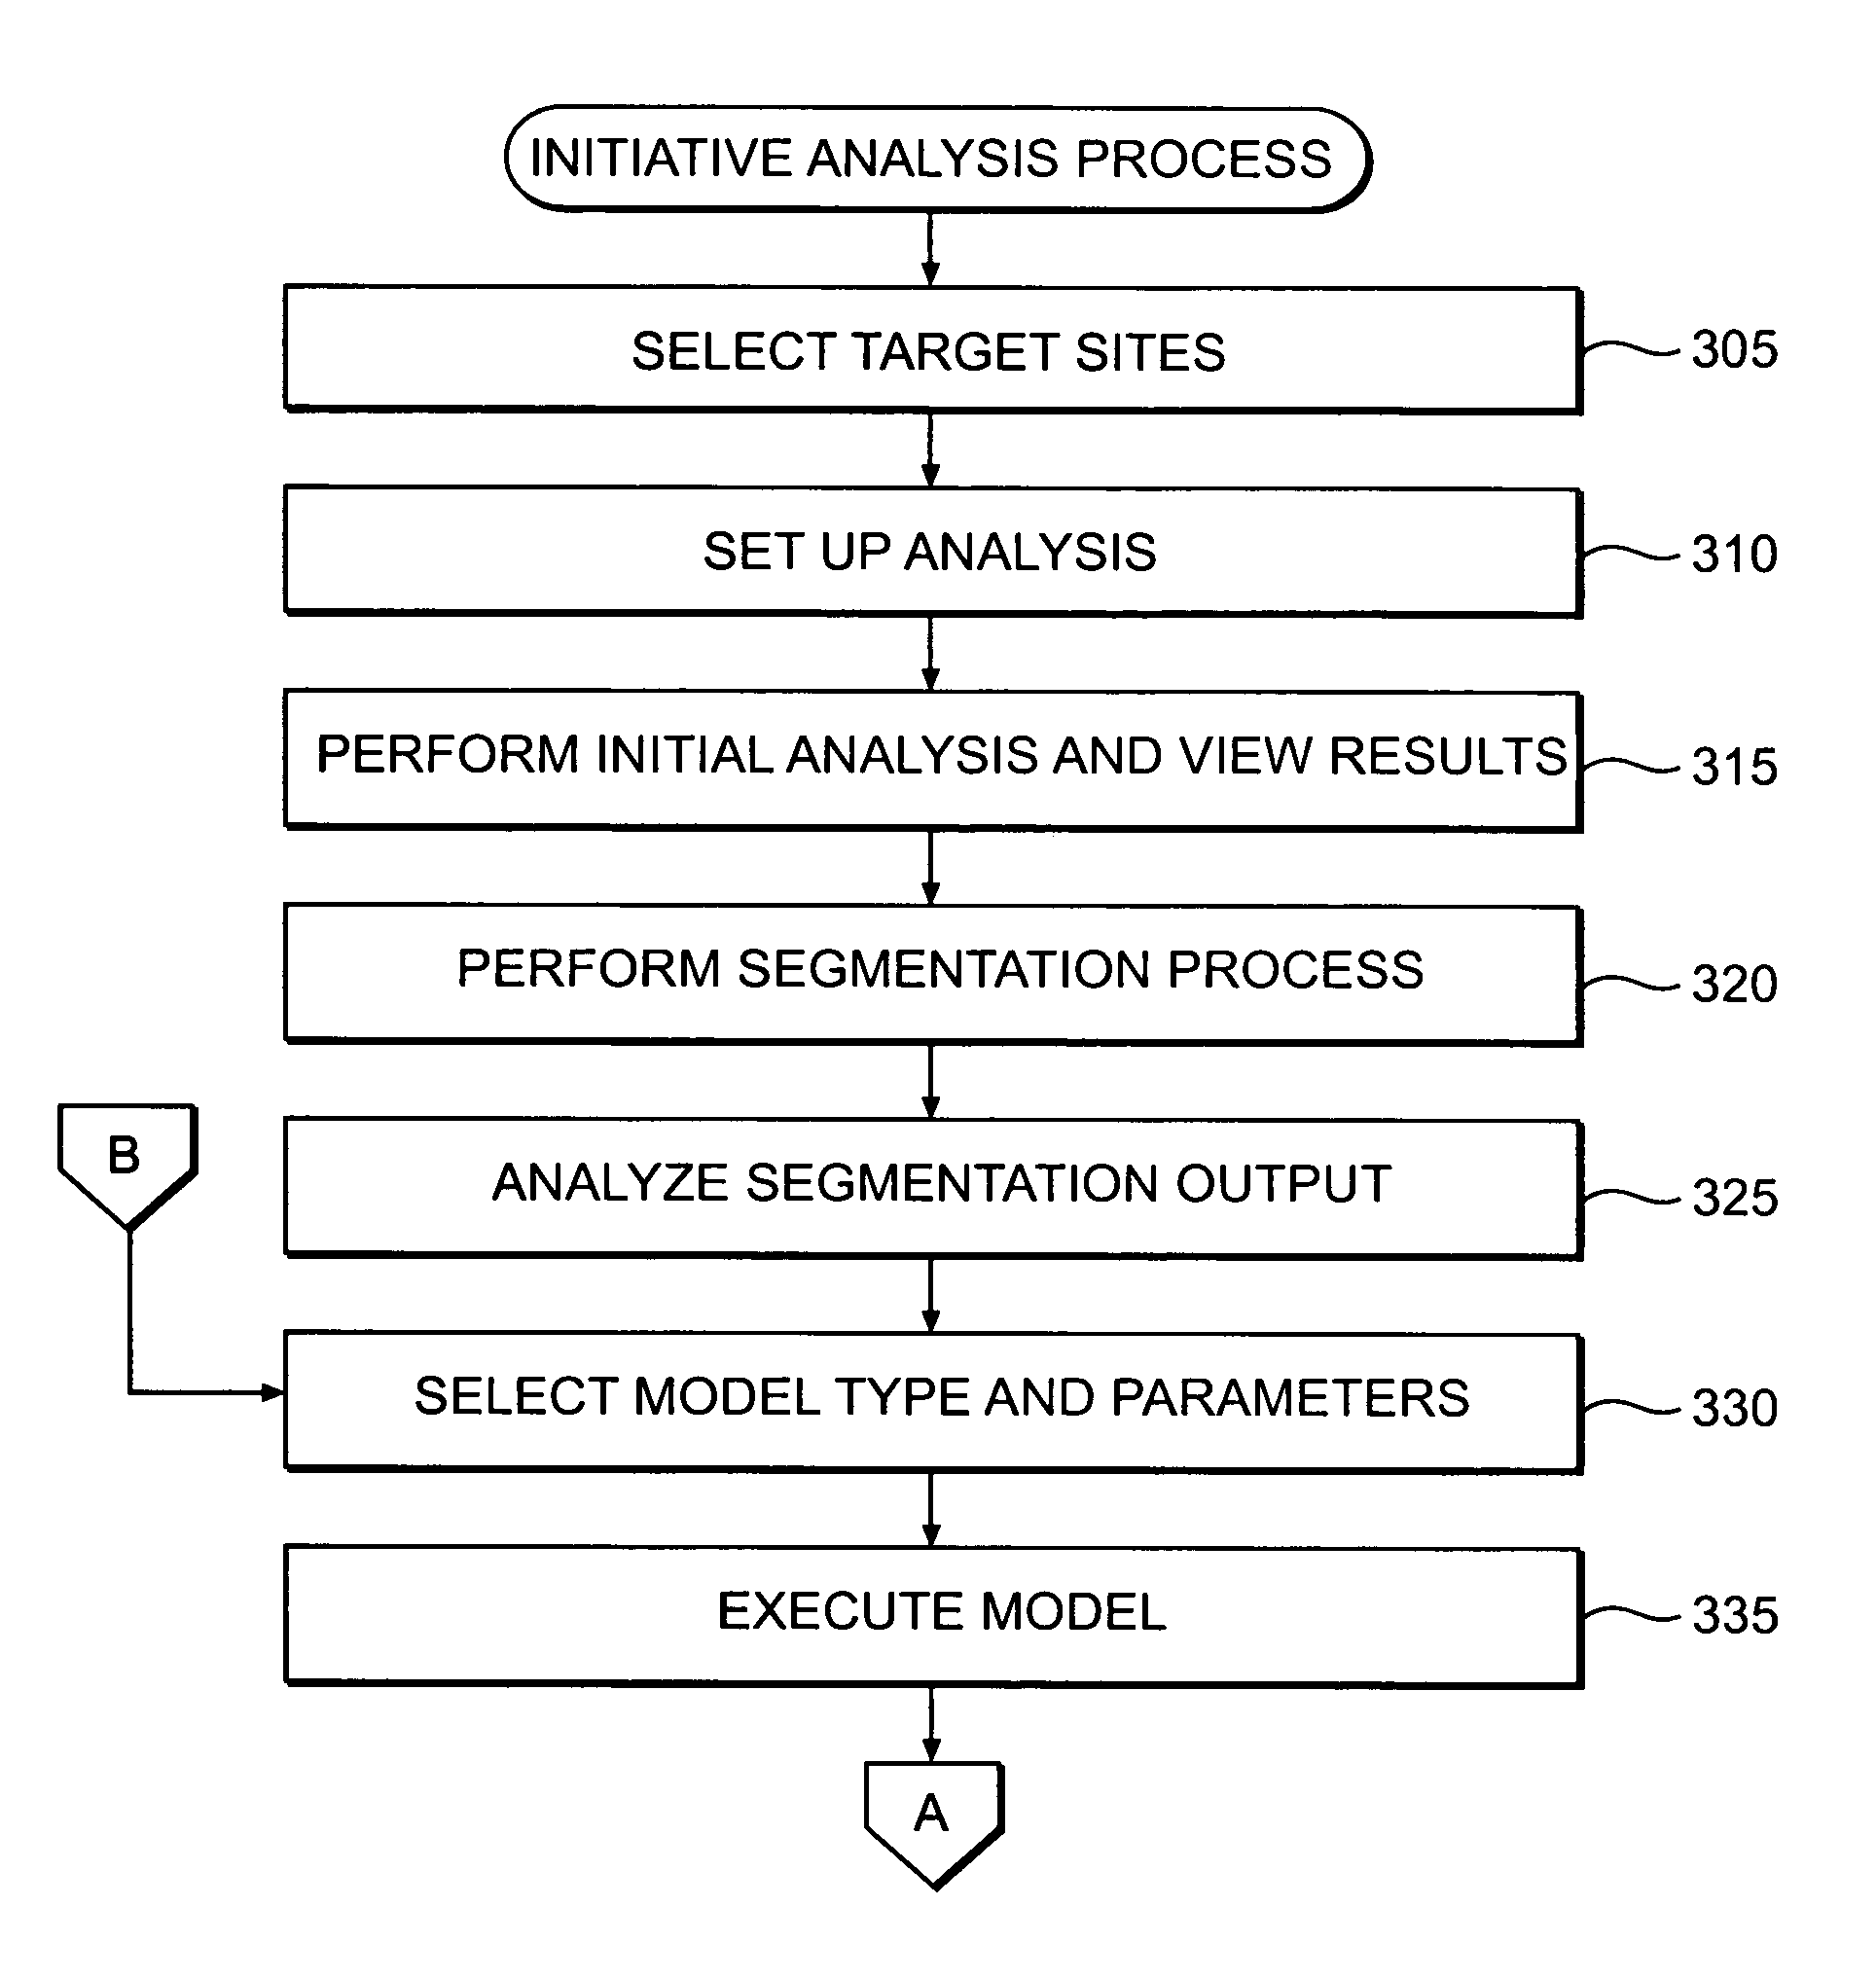 Methods, systems, and articles of manufacture for determining optimal parameter settings for business initiative testing models